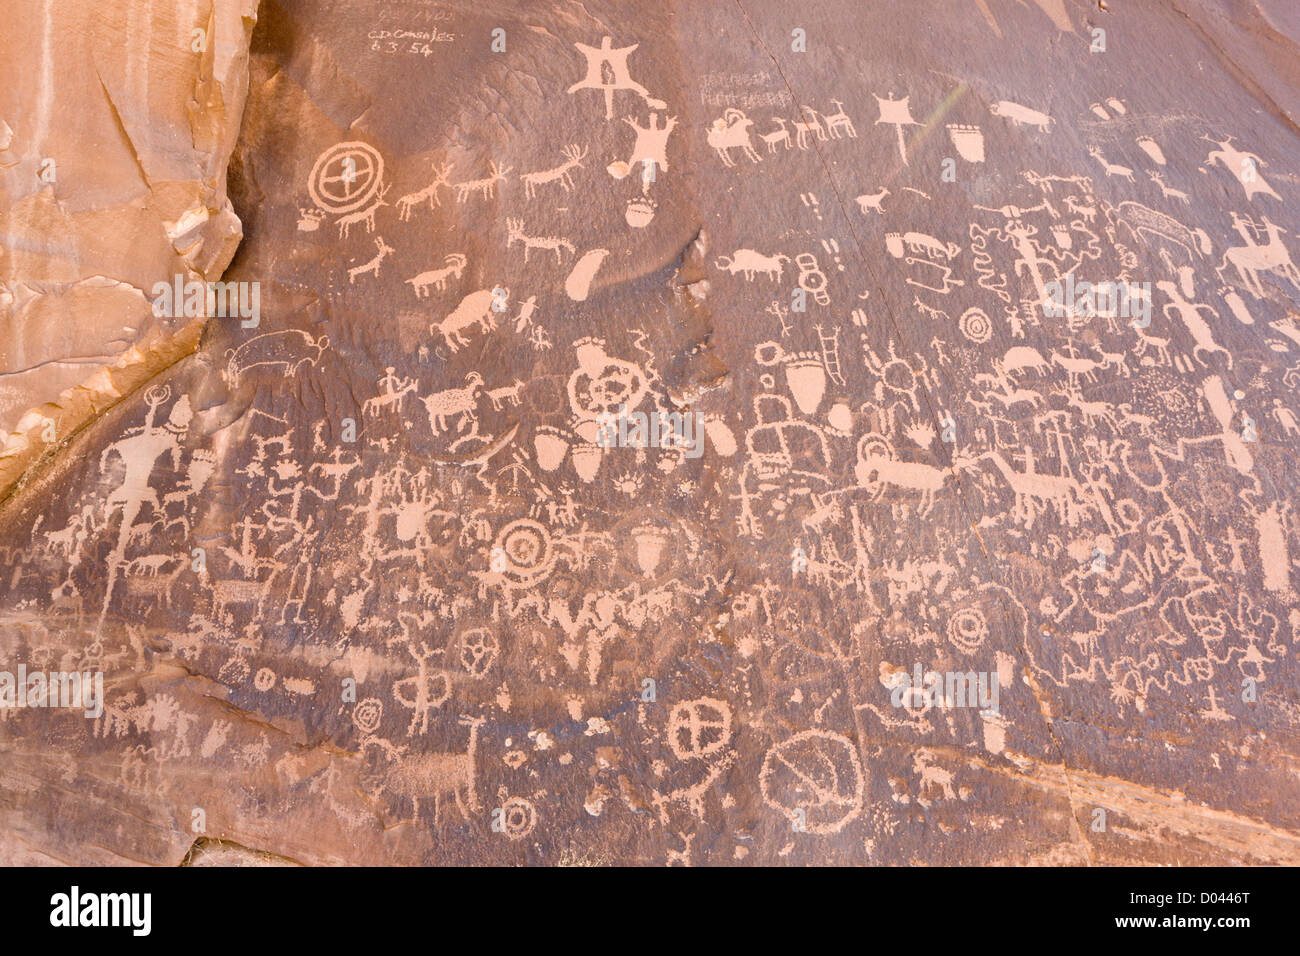 Newspaper Rock National Historic Site, etched with historic and prehistoric petroglyphs; Utah, USA Stock Photo